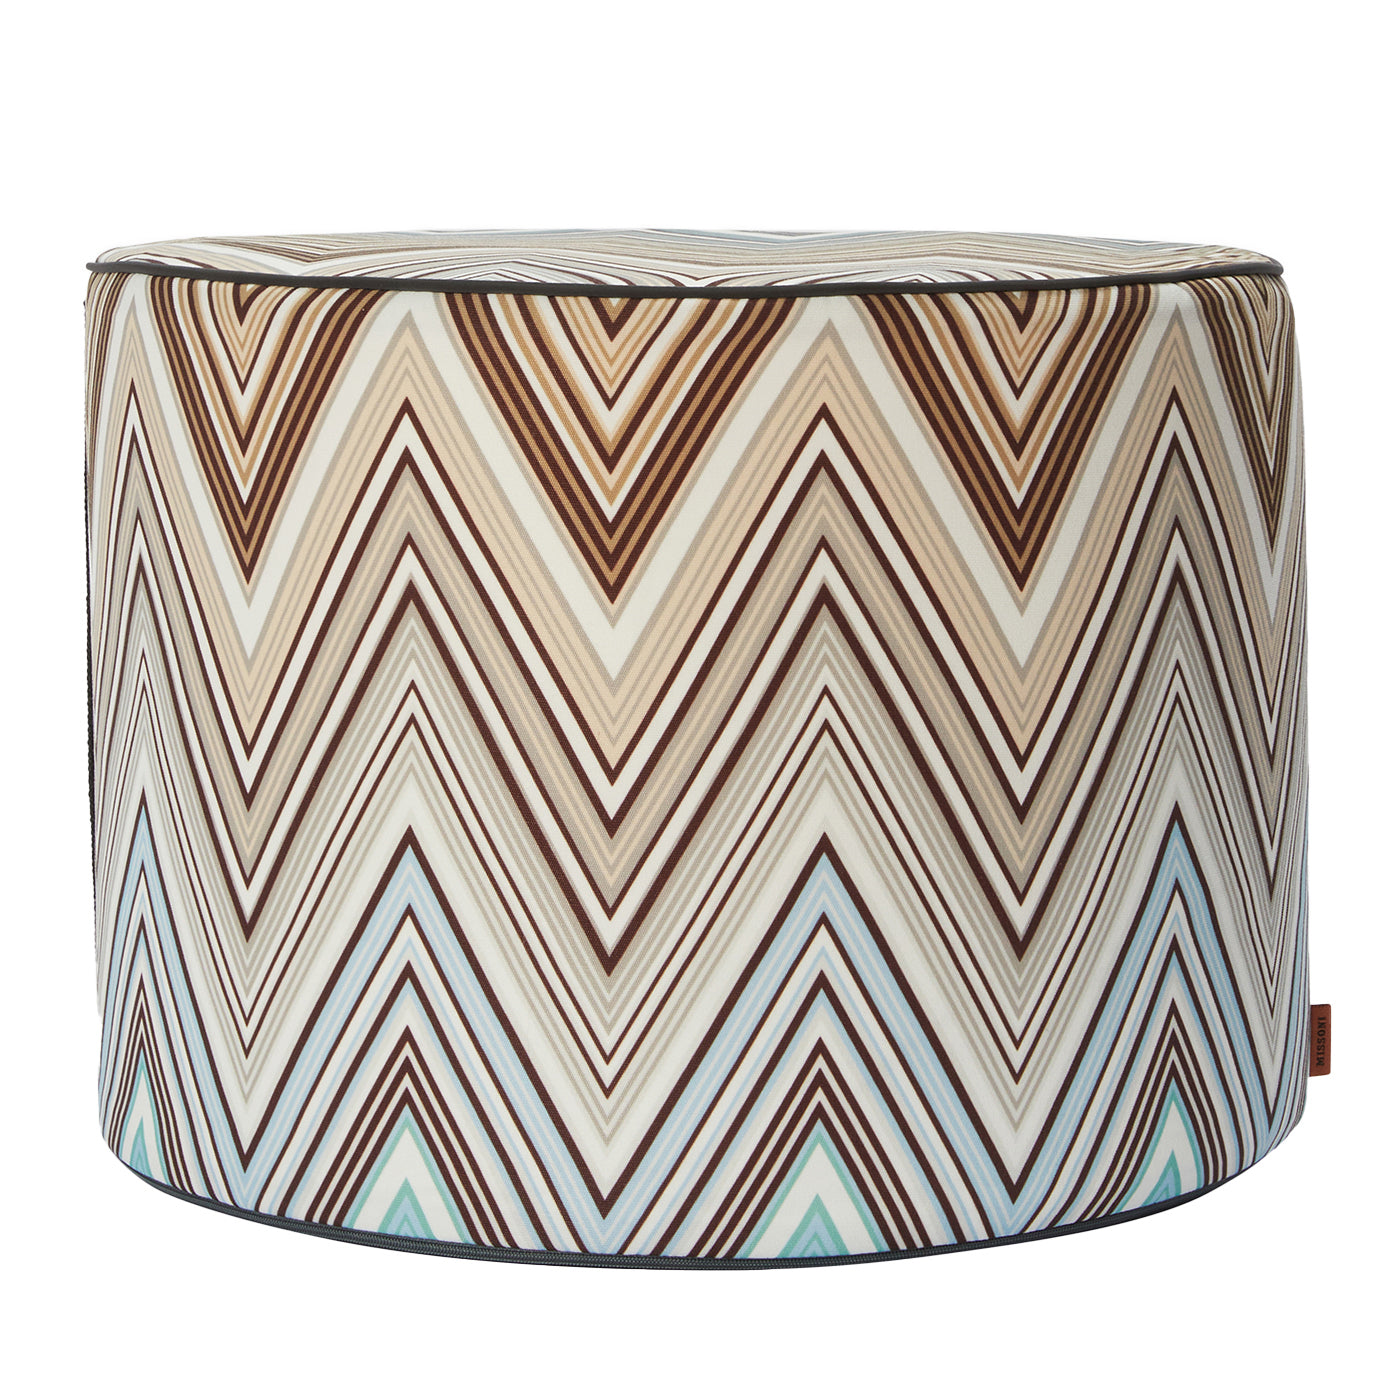 Kew Cylindrical Zigzag Pattern Outdoor Pouf #1 - Main view